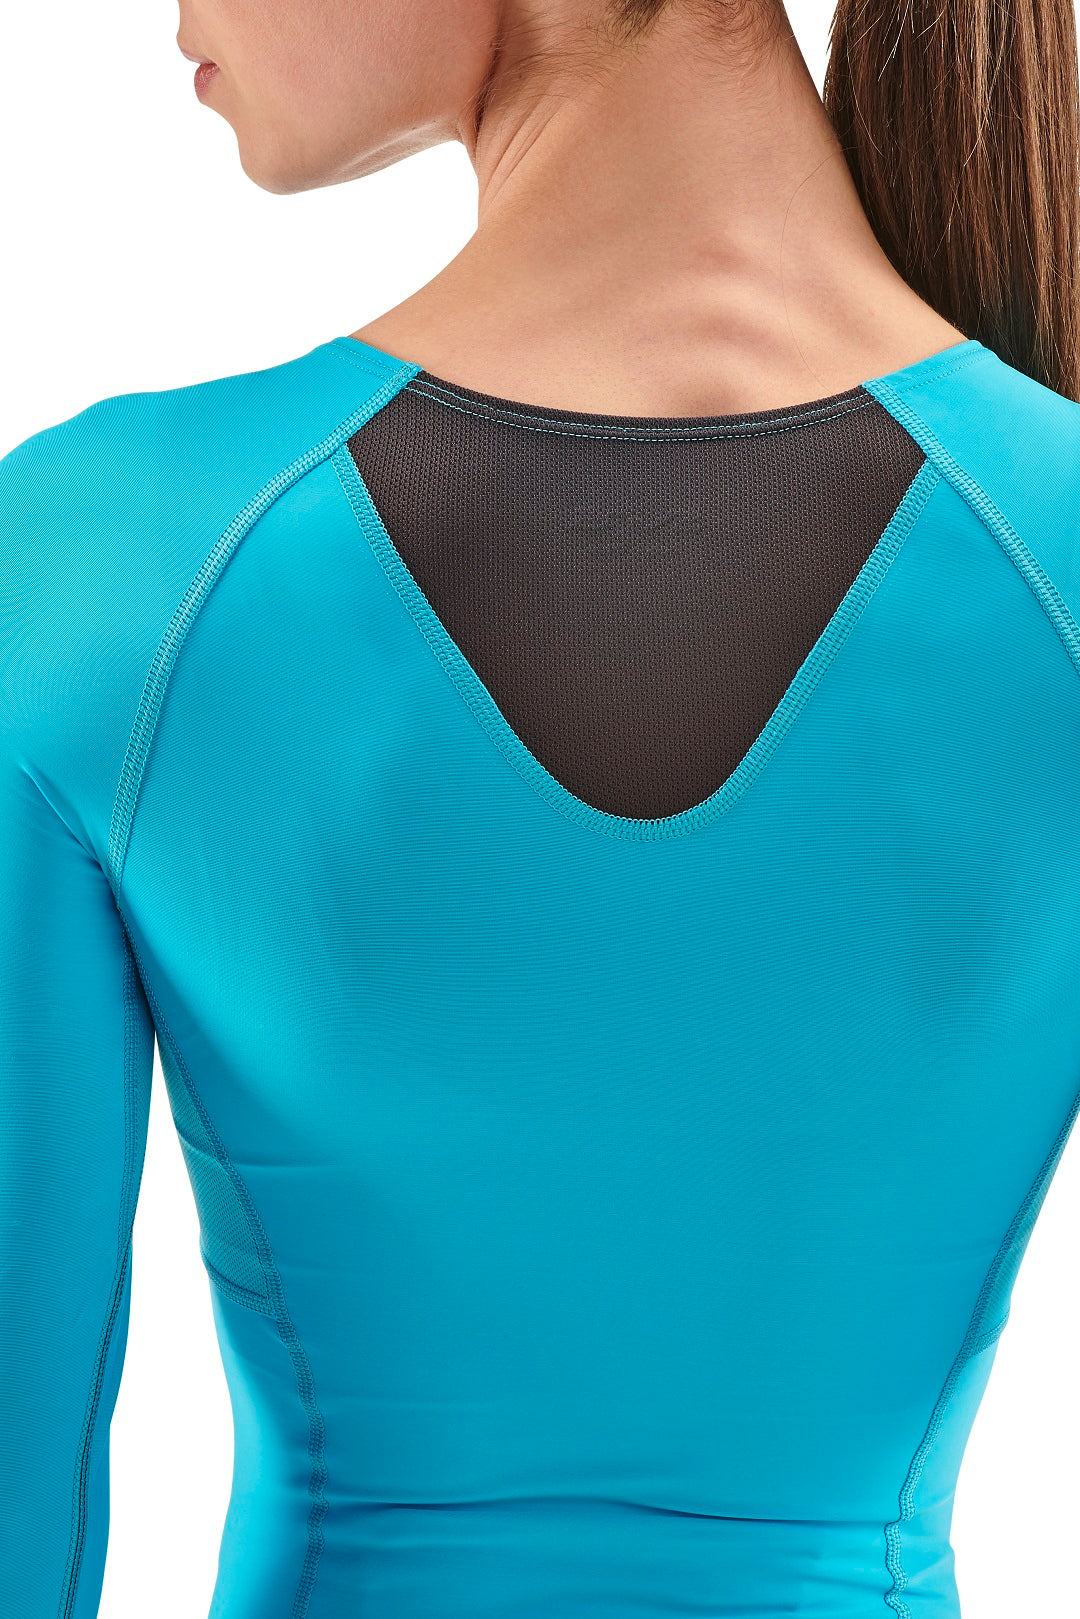 Skins Women's Compression Long Sleeve Tops 3-Series - Cyan